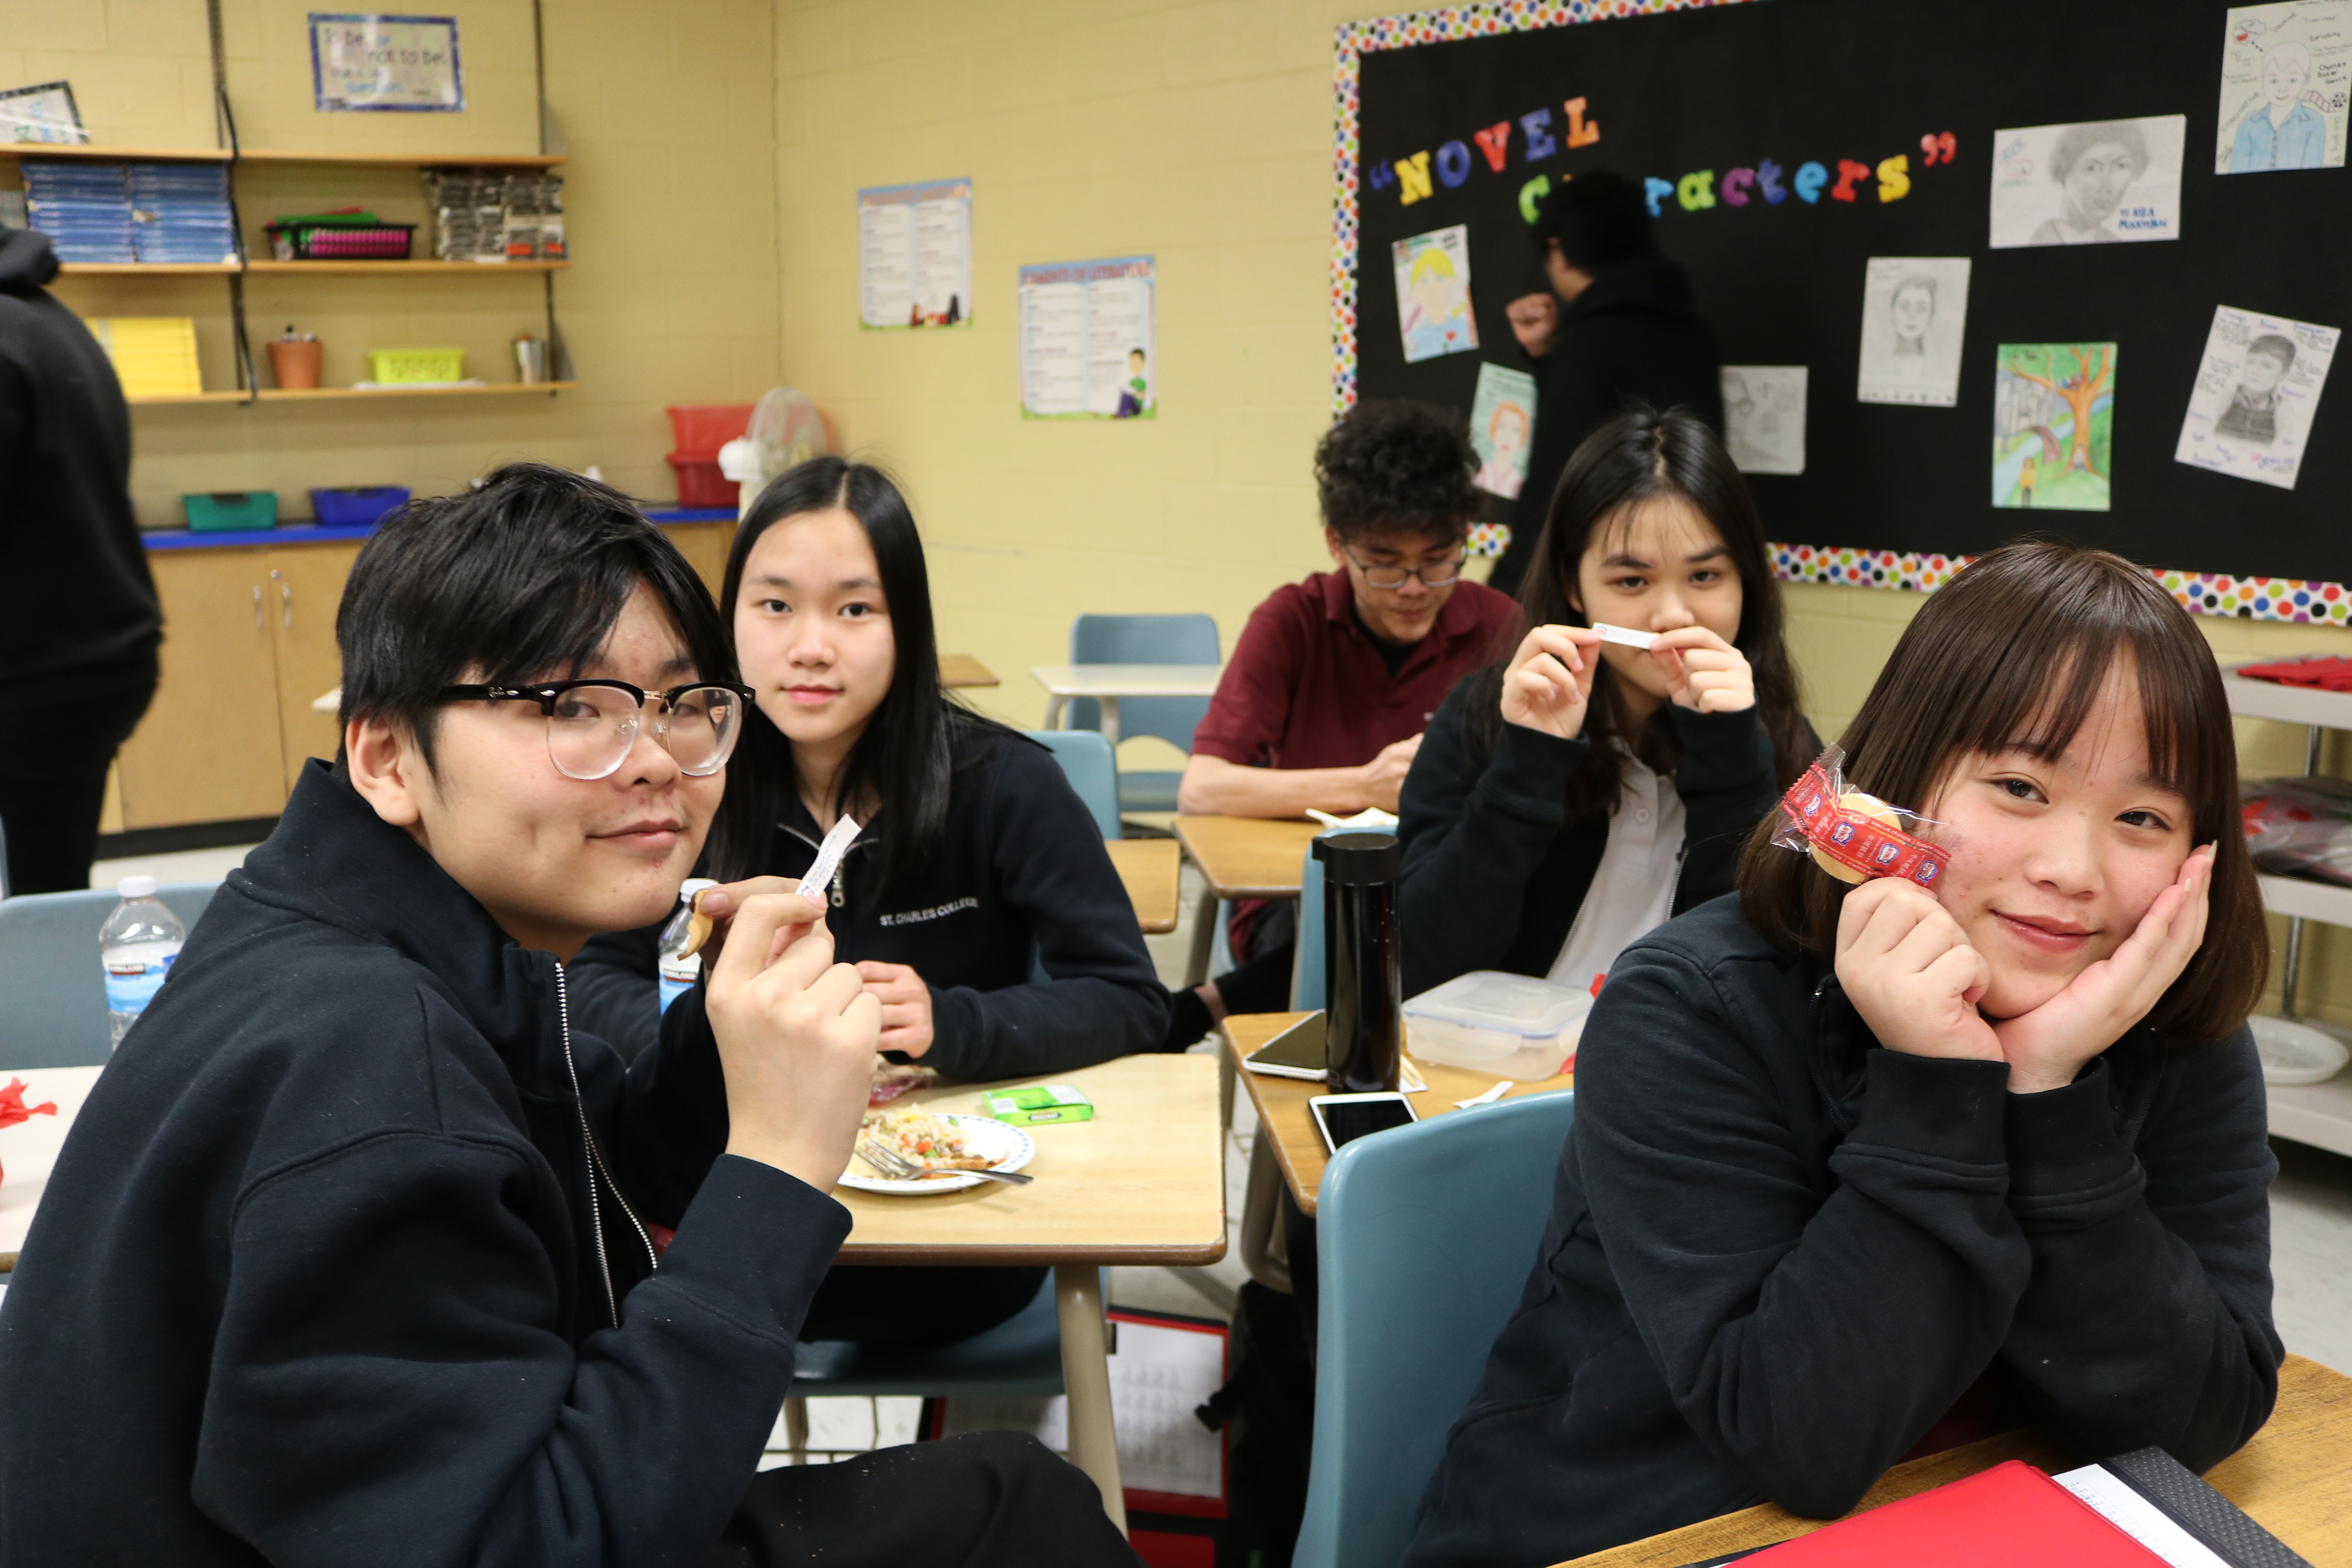 Staff and Students ring in the Chinese New Year at St. Charles College